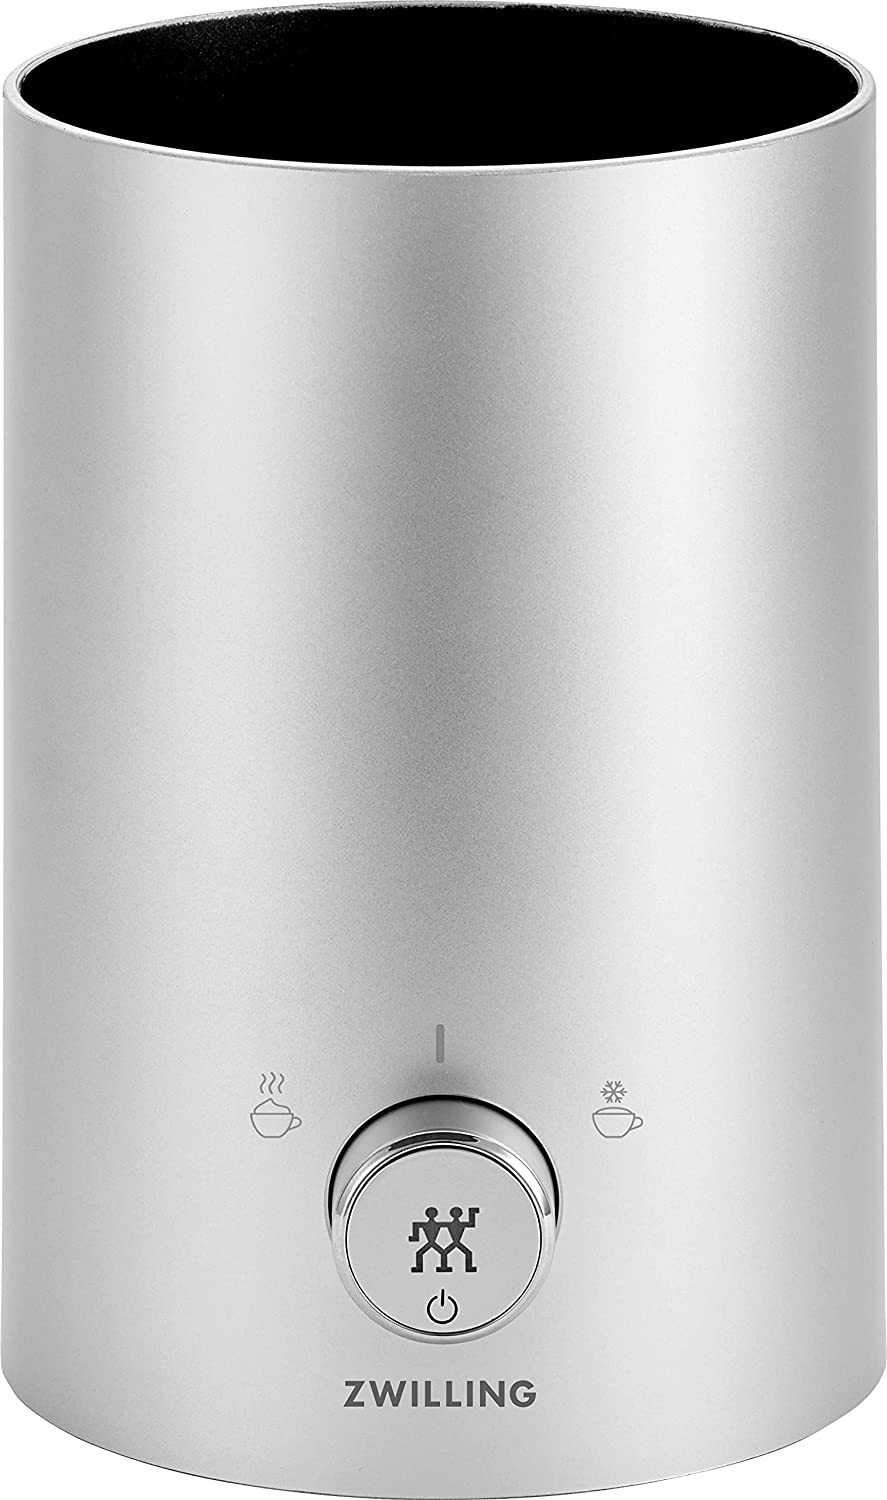 ZWILLING Enfinigy Milk frother 2